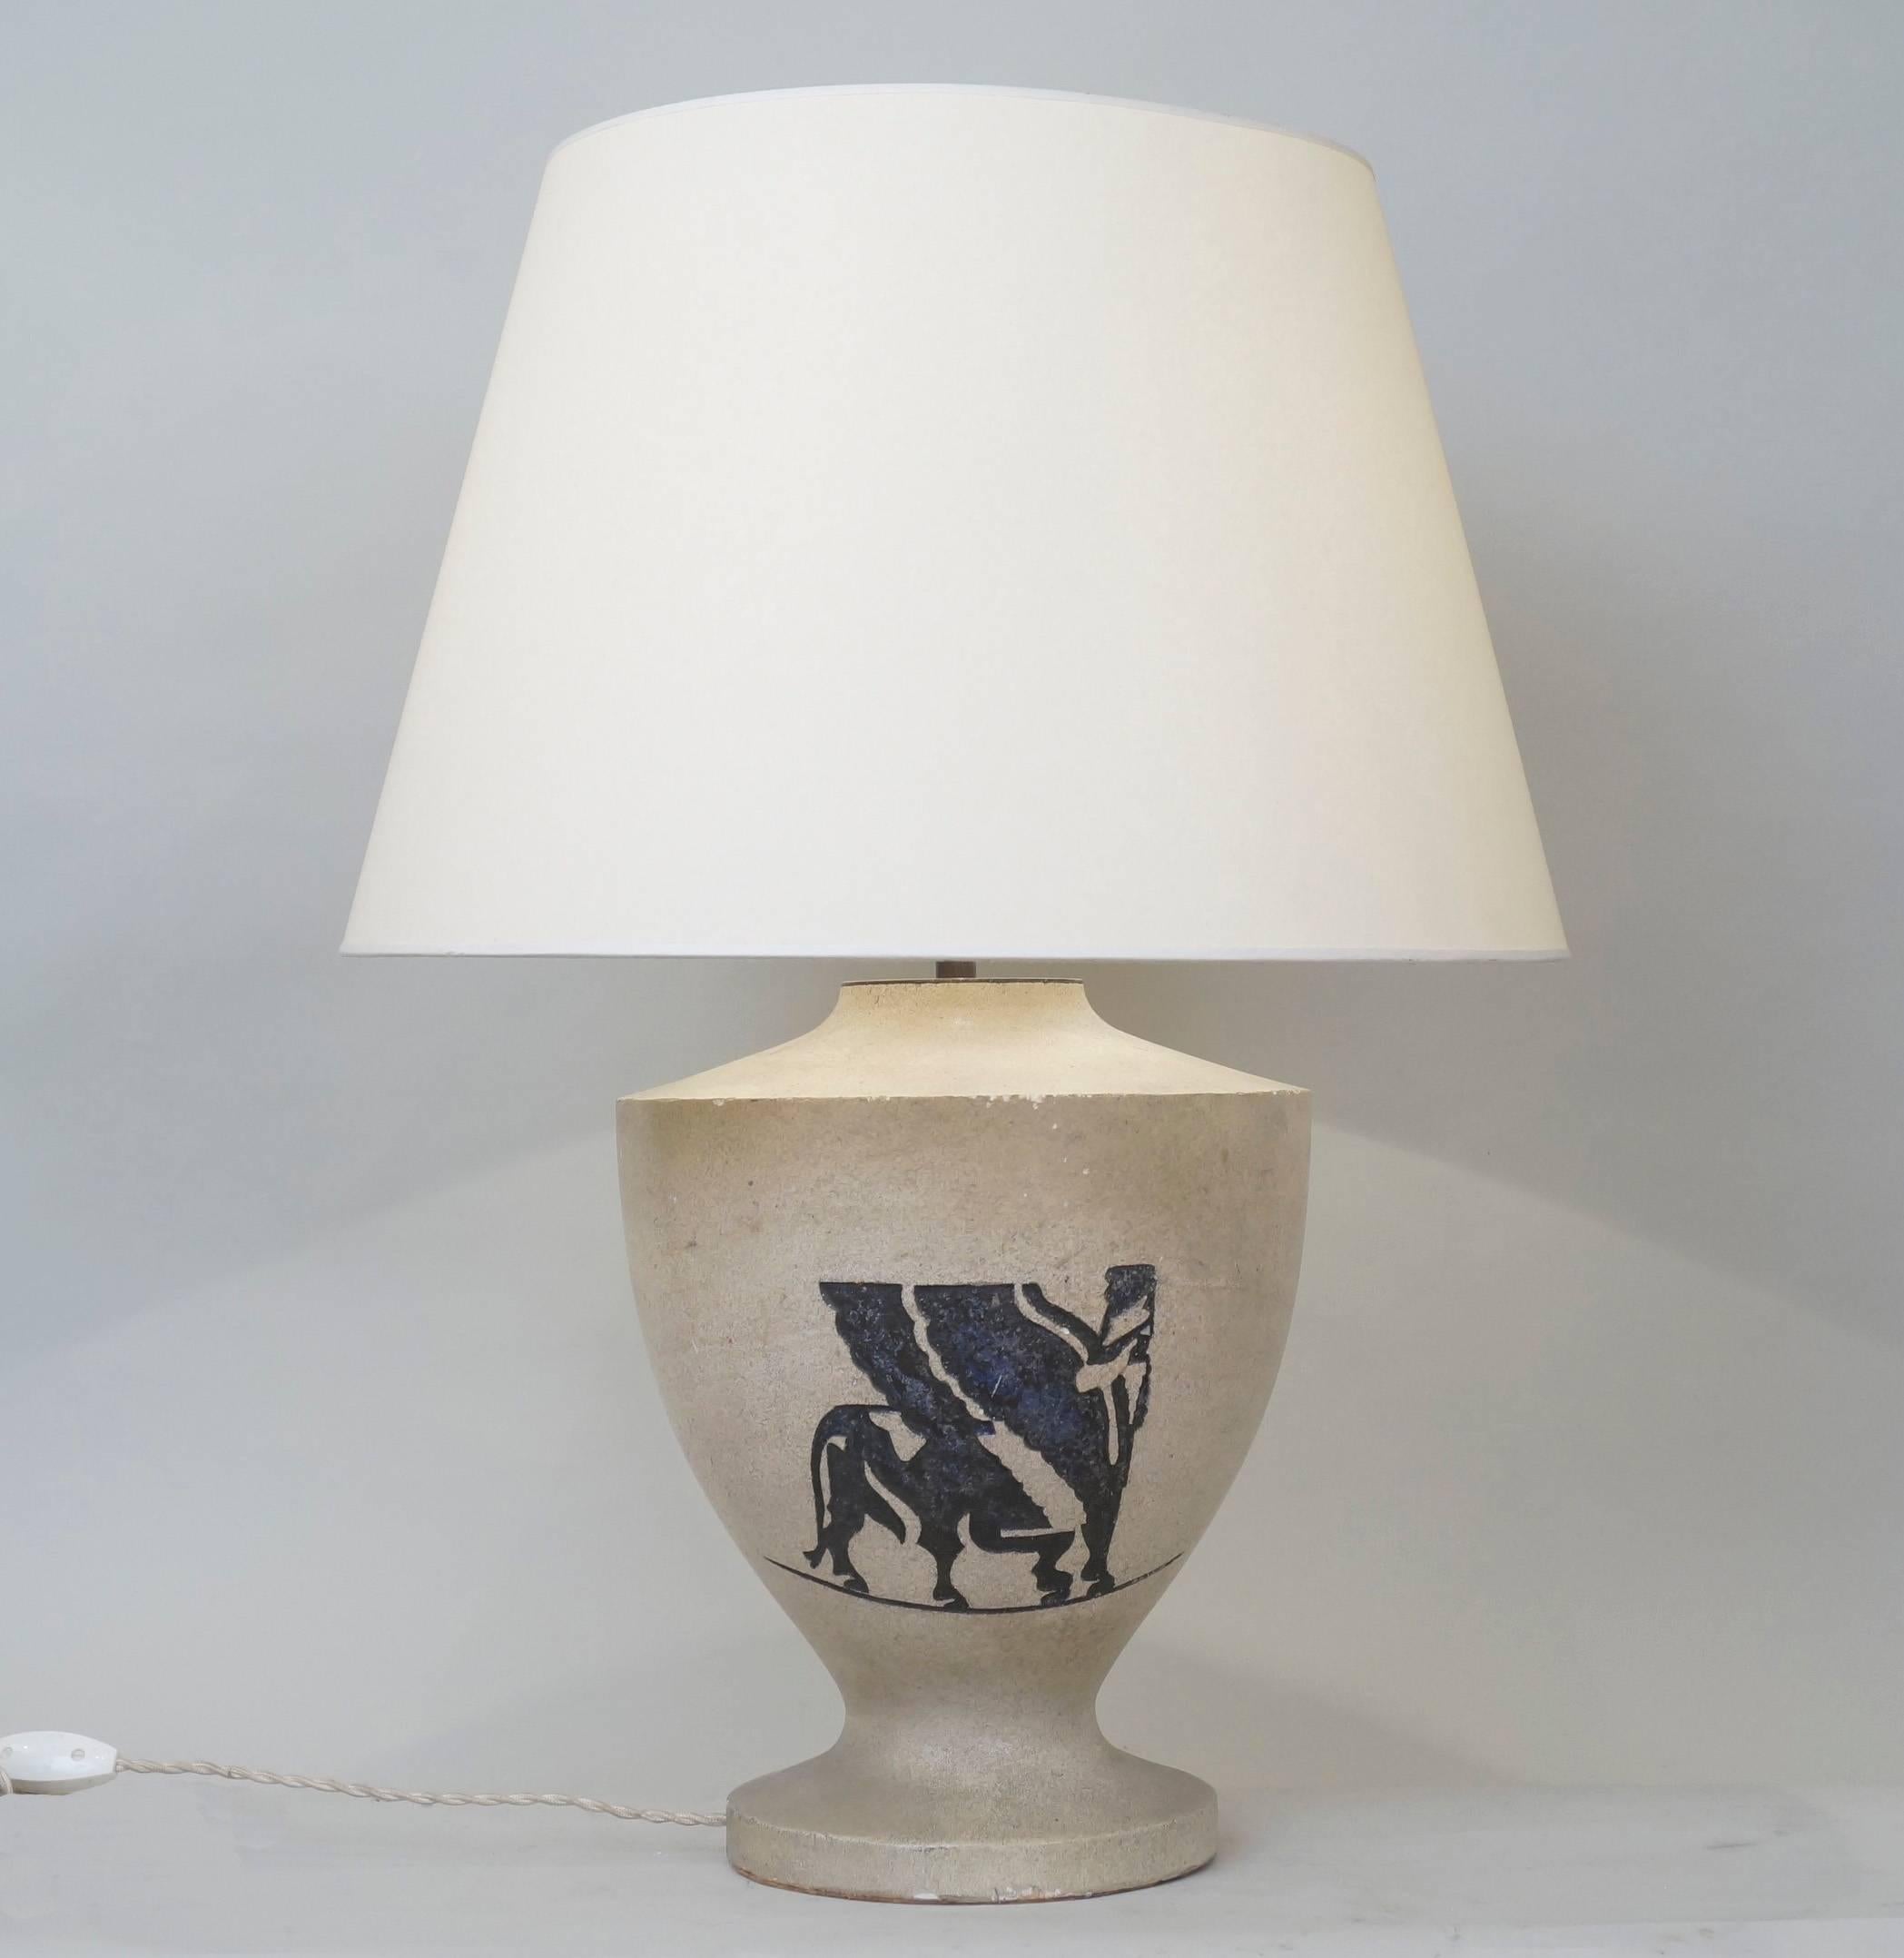 Midcentury stone table lamp with a chimeric engraved
Custom-made fabric lampshade.
Rewired with twisted silk cord.
US standard plug on request.
Measures: Ceramic body height: 32 cm - 12.6 in.
Height with lampshade: 64 cm - 25.2 in.

